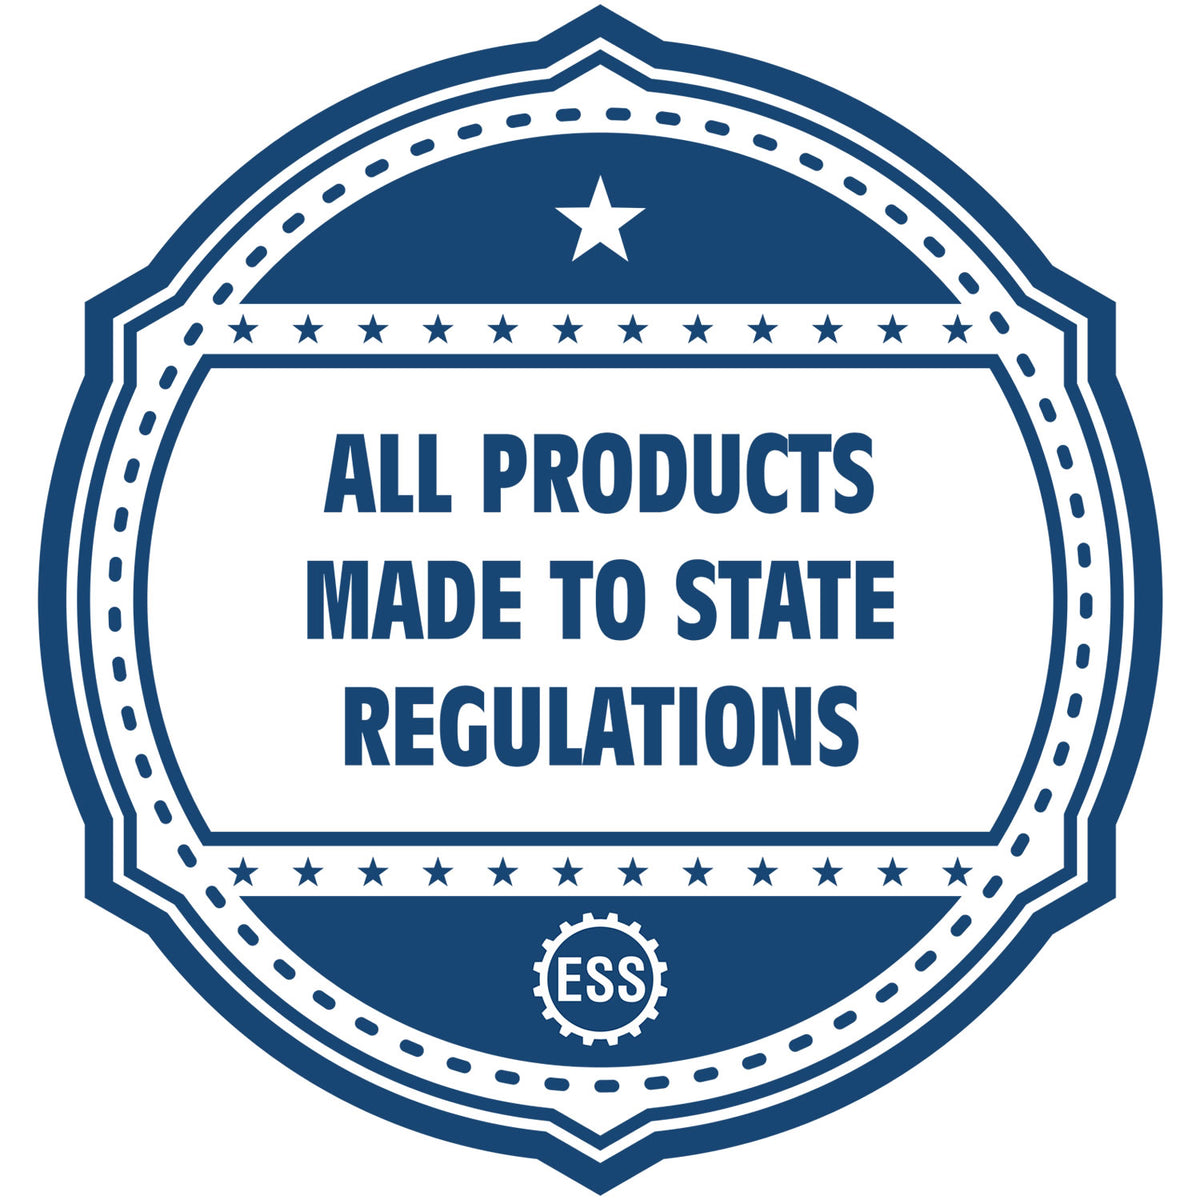 An icon or badge element for the Super Slim California Notary Public Stamp showing that this product is made in compliance with state regulations.